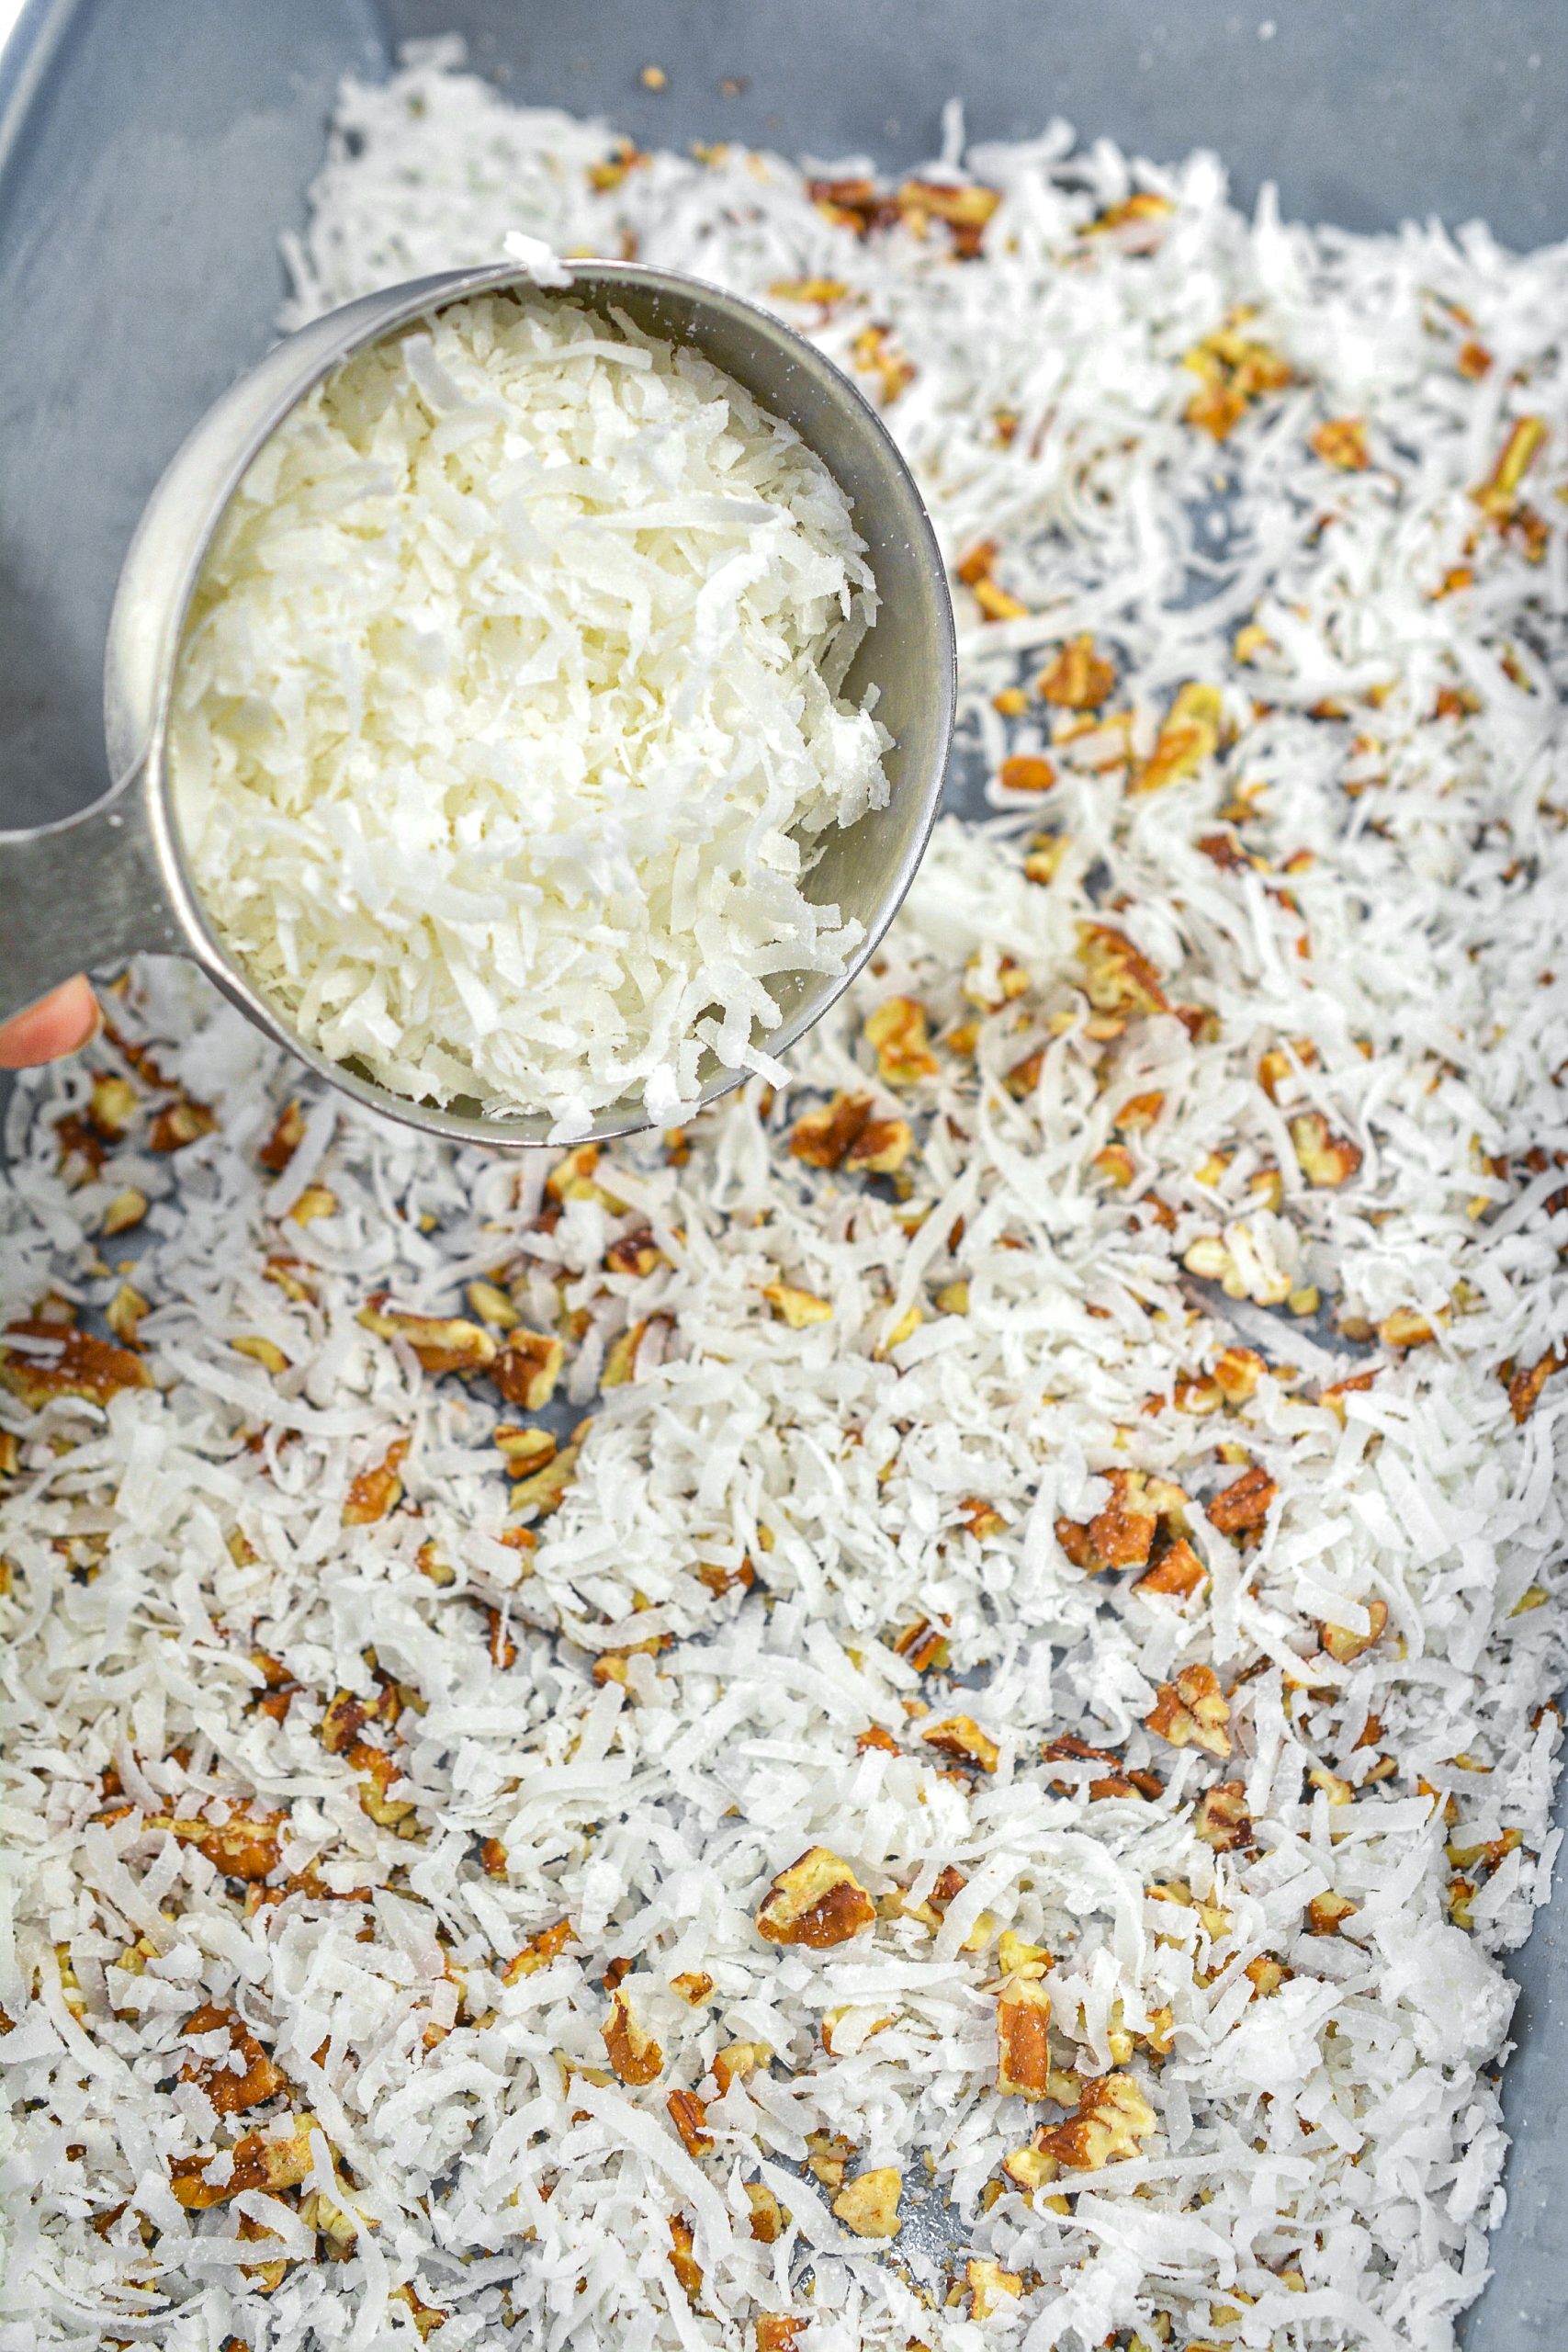 1 ½ cups of shredded coconut in the bottom of a well-greased casserole dish.